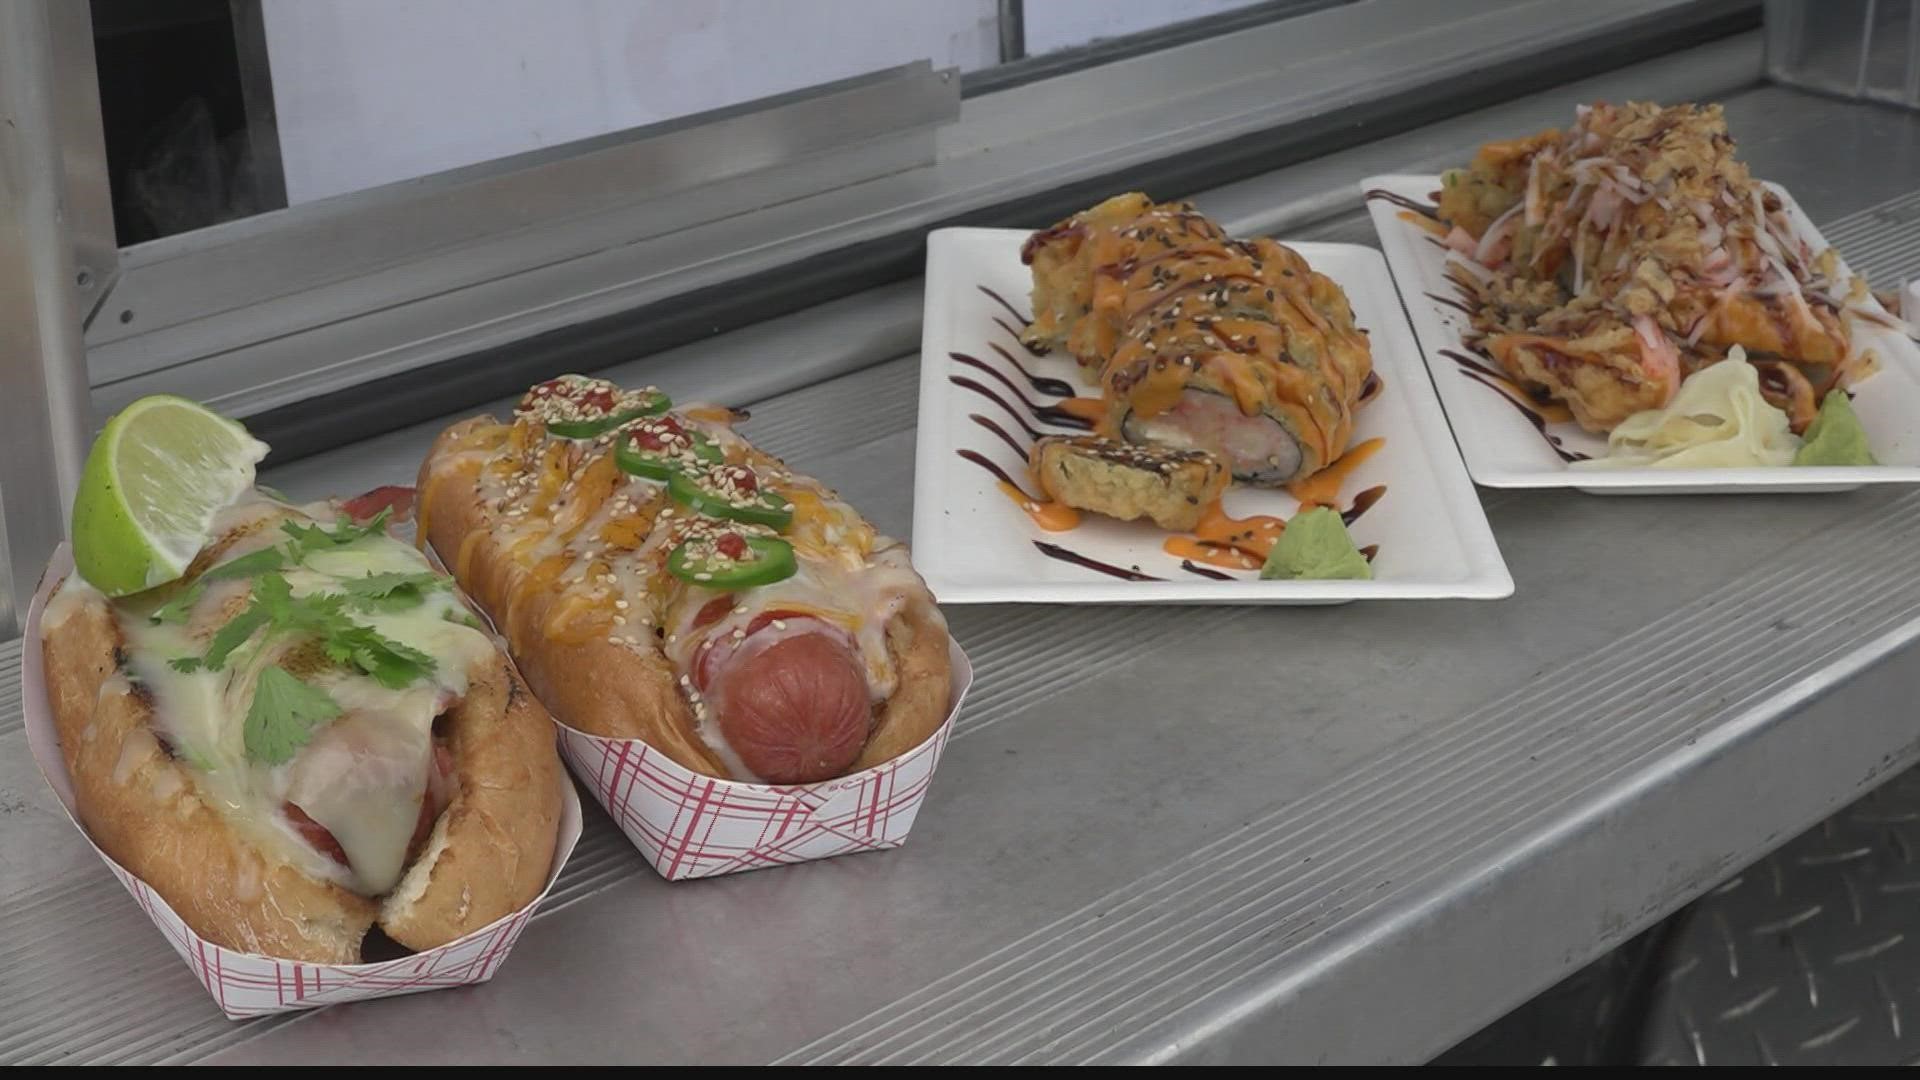 The food truck has traditional and sushi-inspired hotdogs.